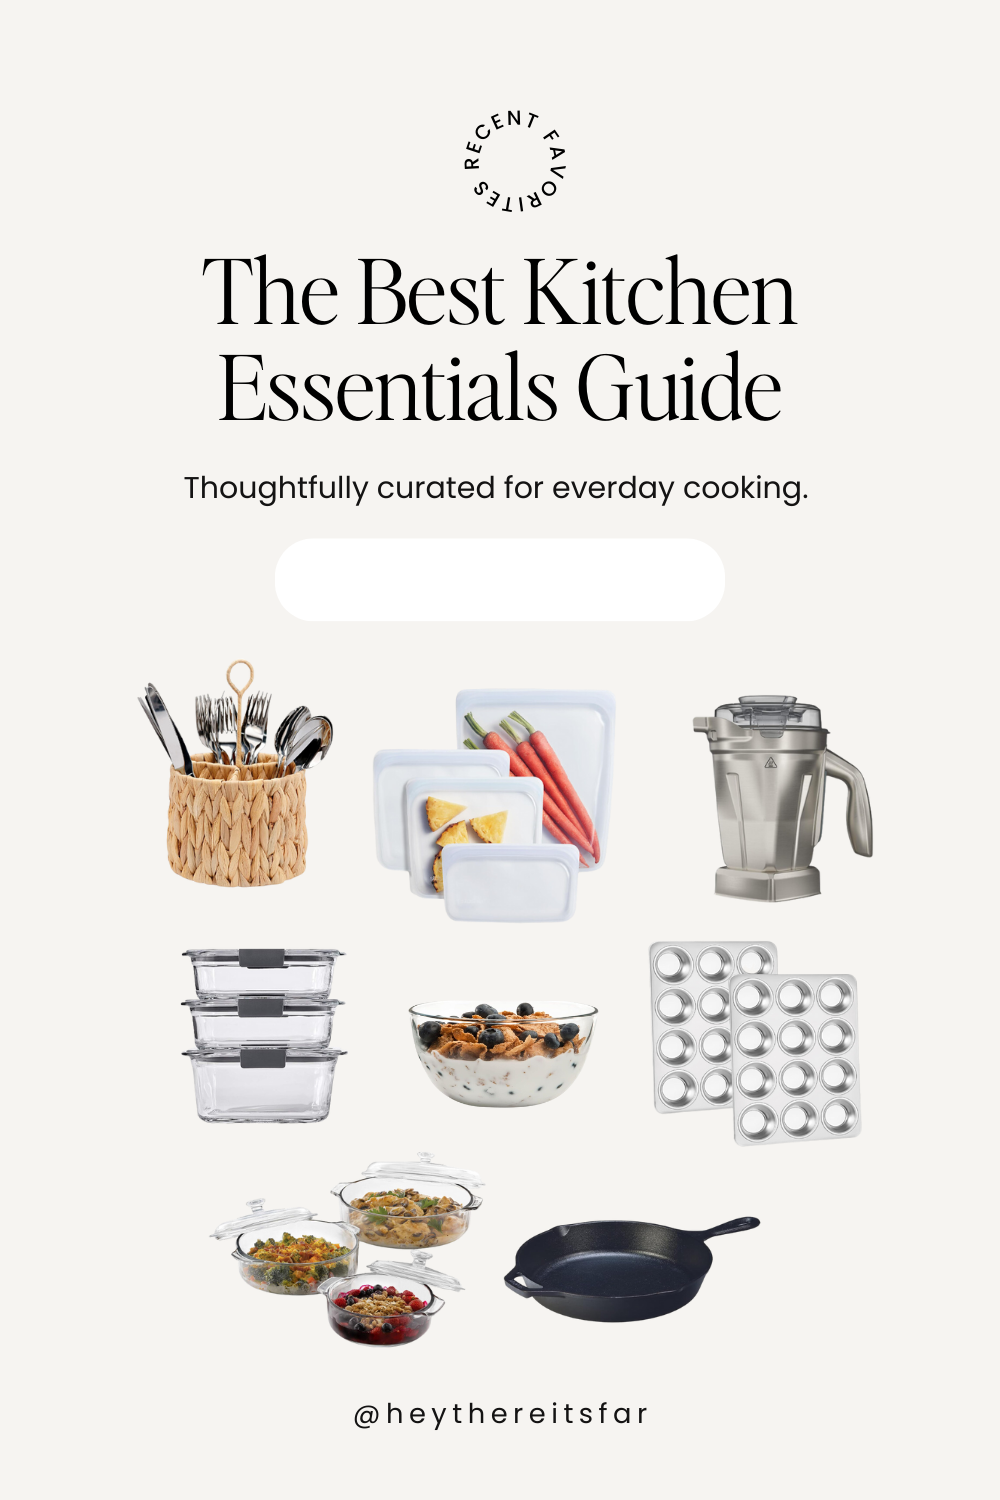 Best Kitchen Essentials. A thoughtfully curated list for everyday cooking.